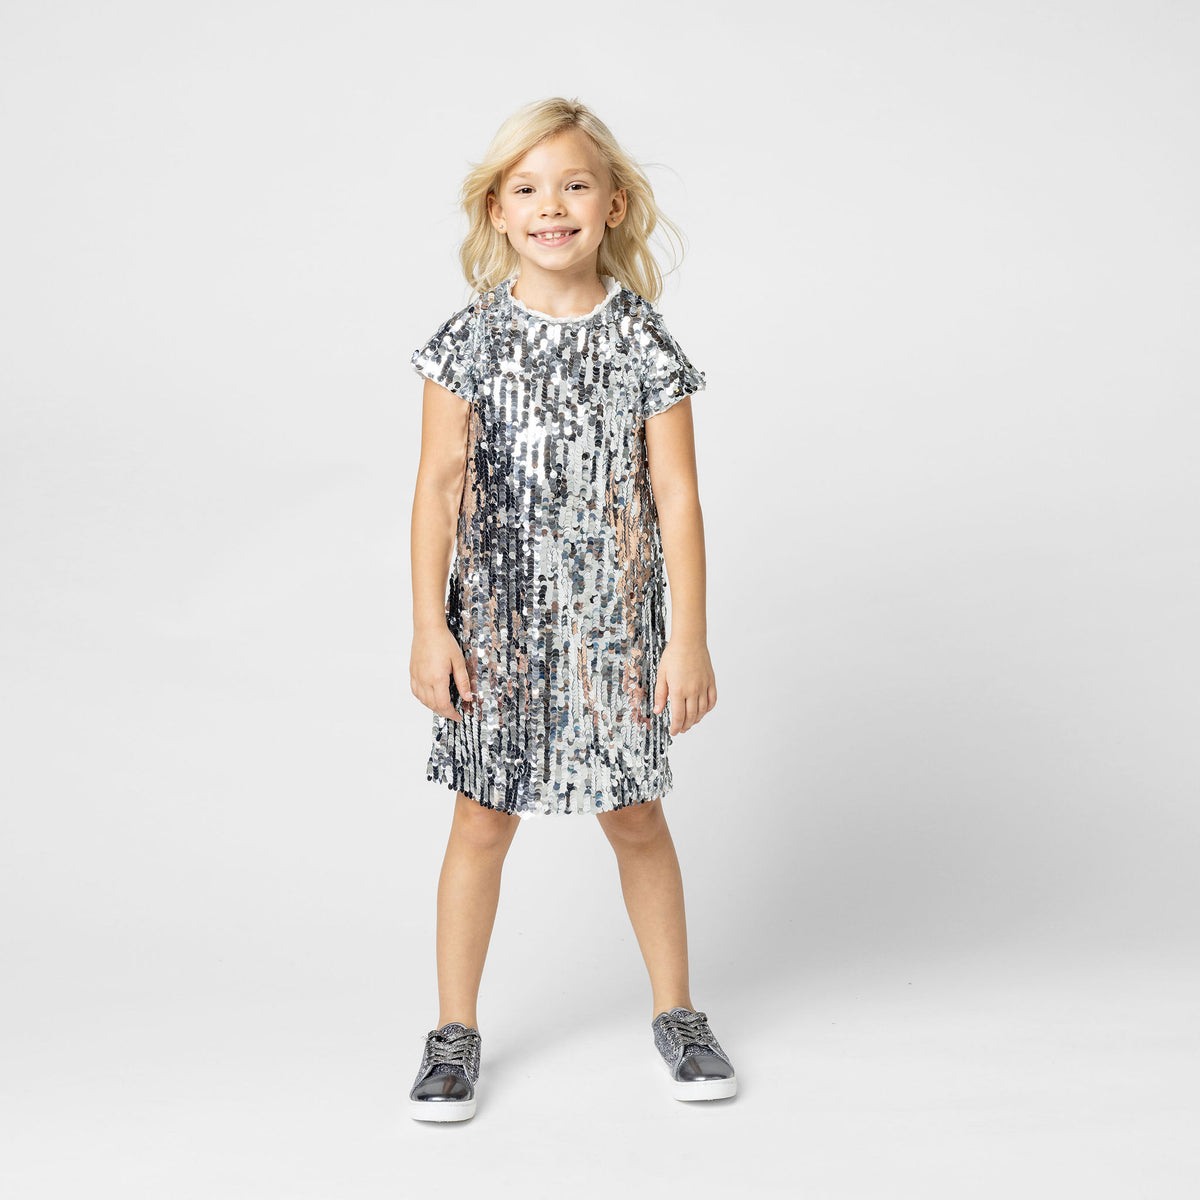 Coco Sequin Girls Party Dress, Silver